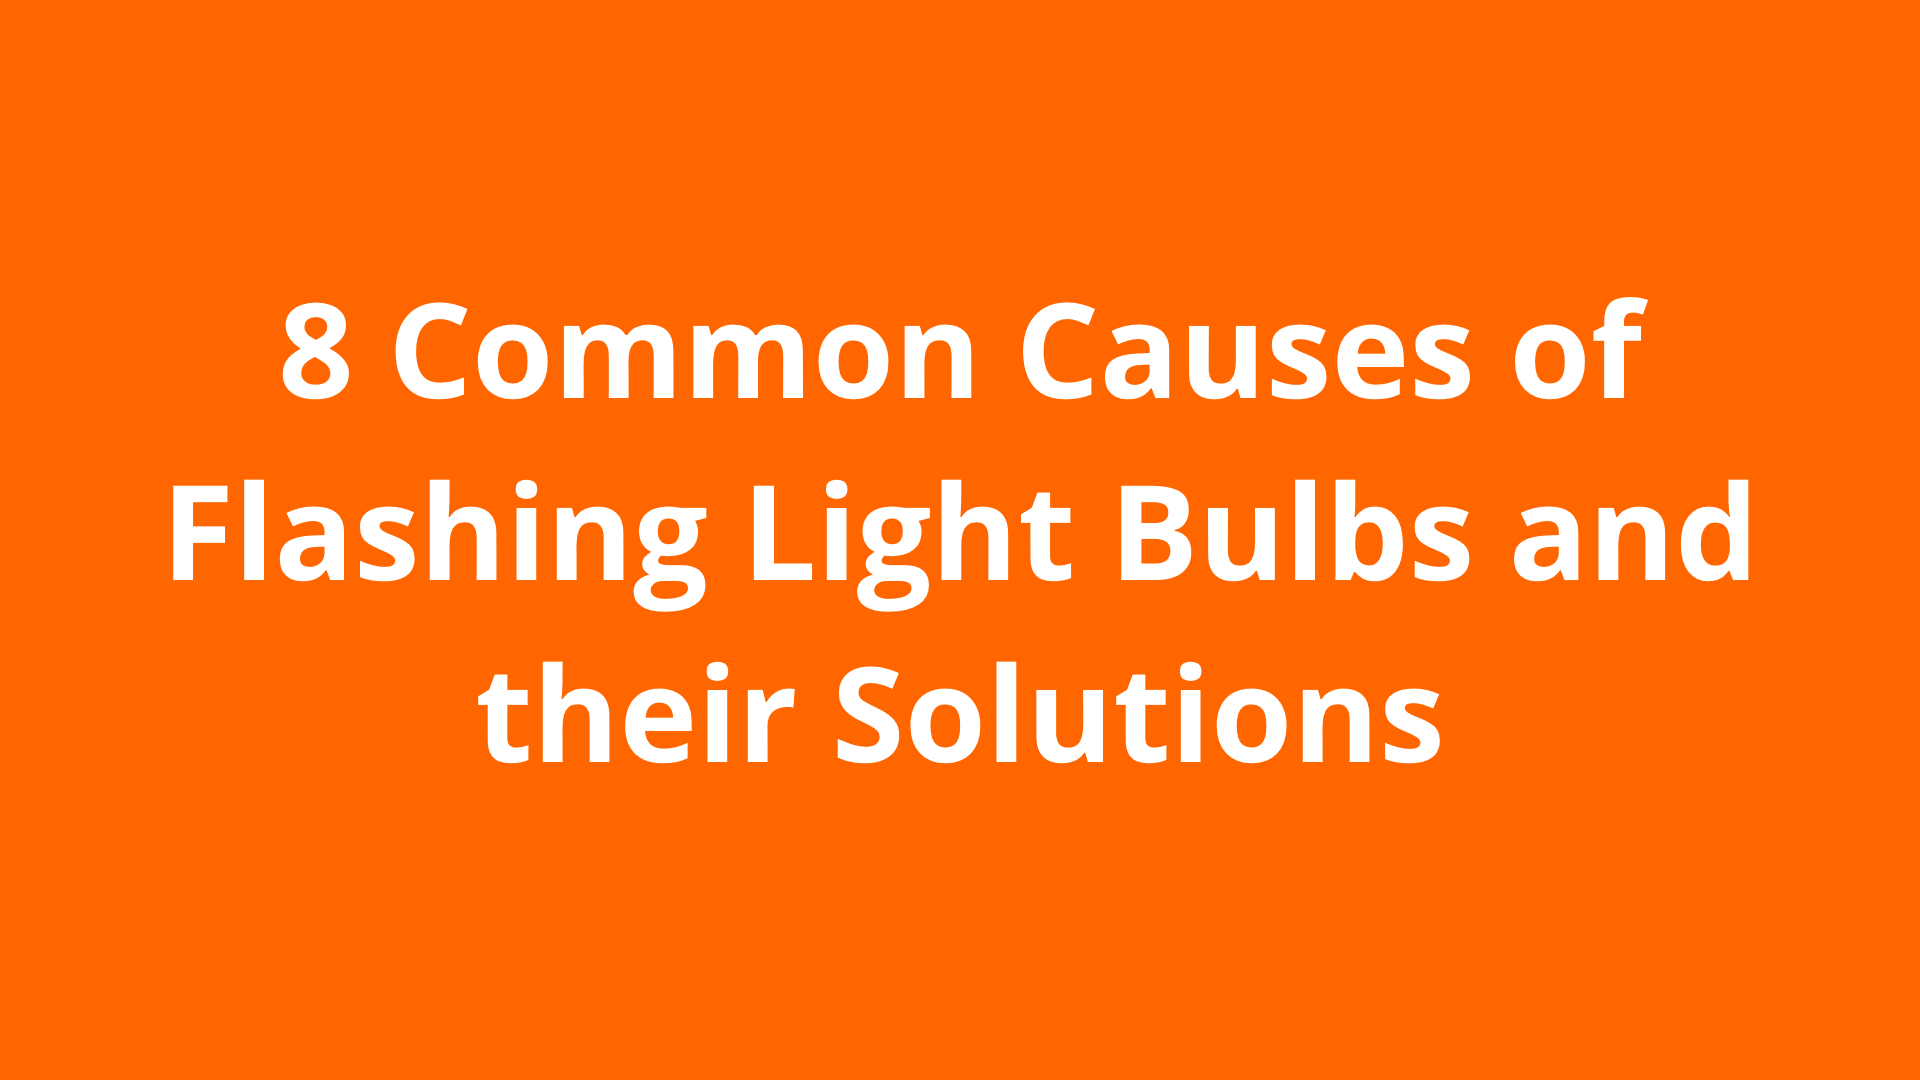 8 Common Causes of Flashing Light Bulbs and their Solutions